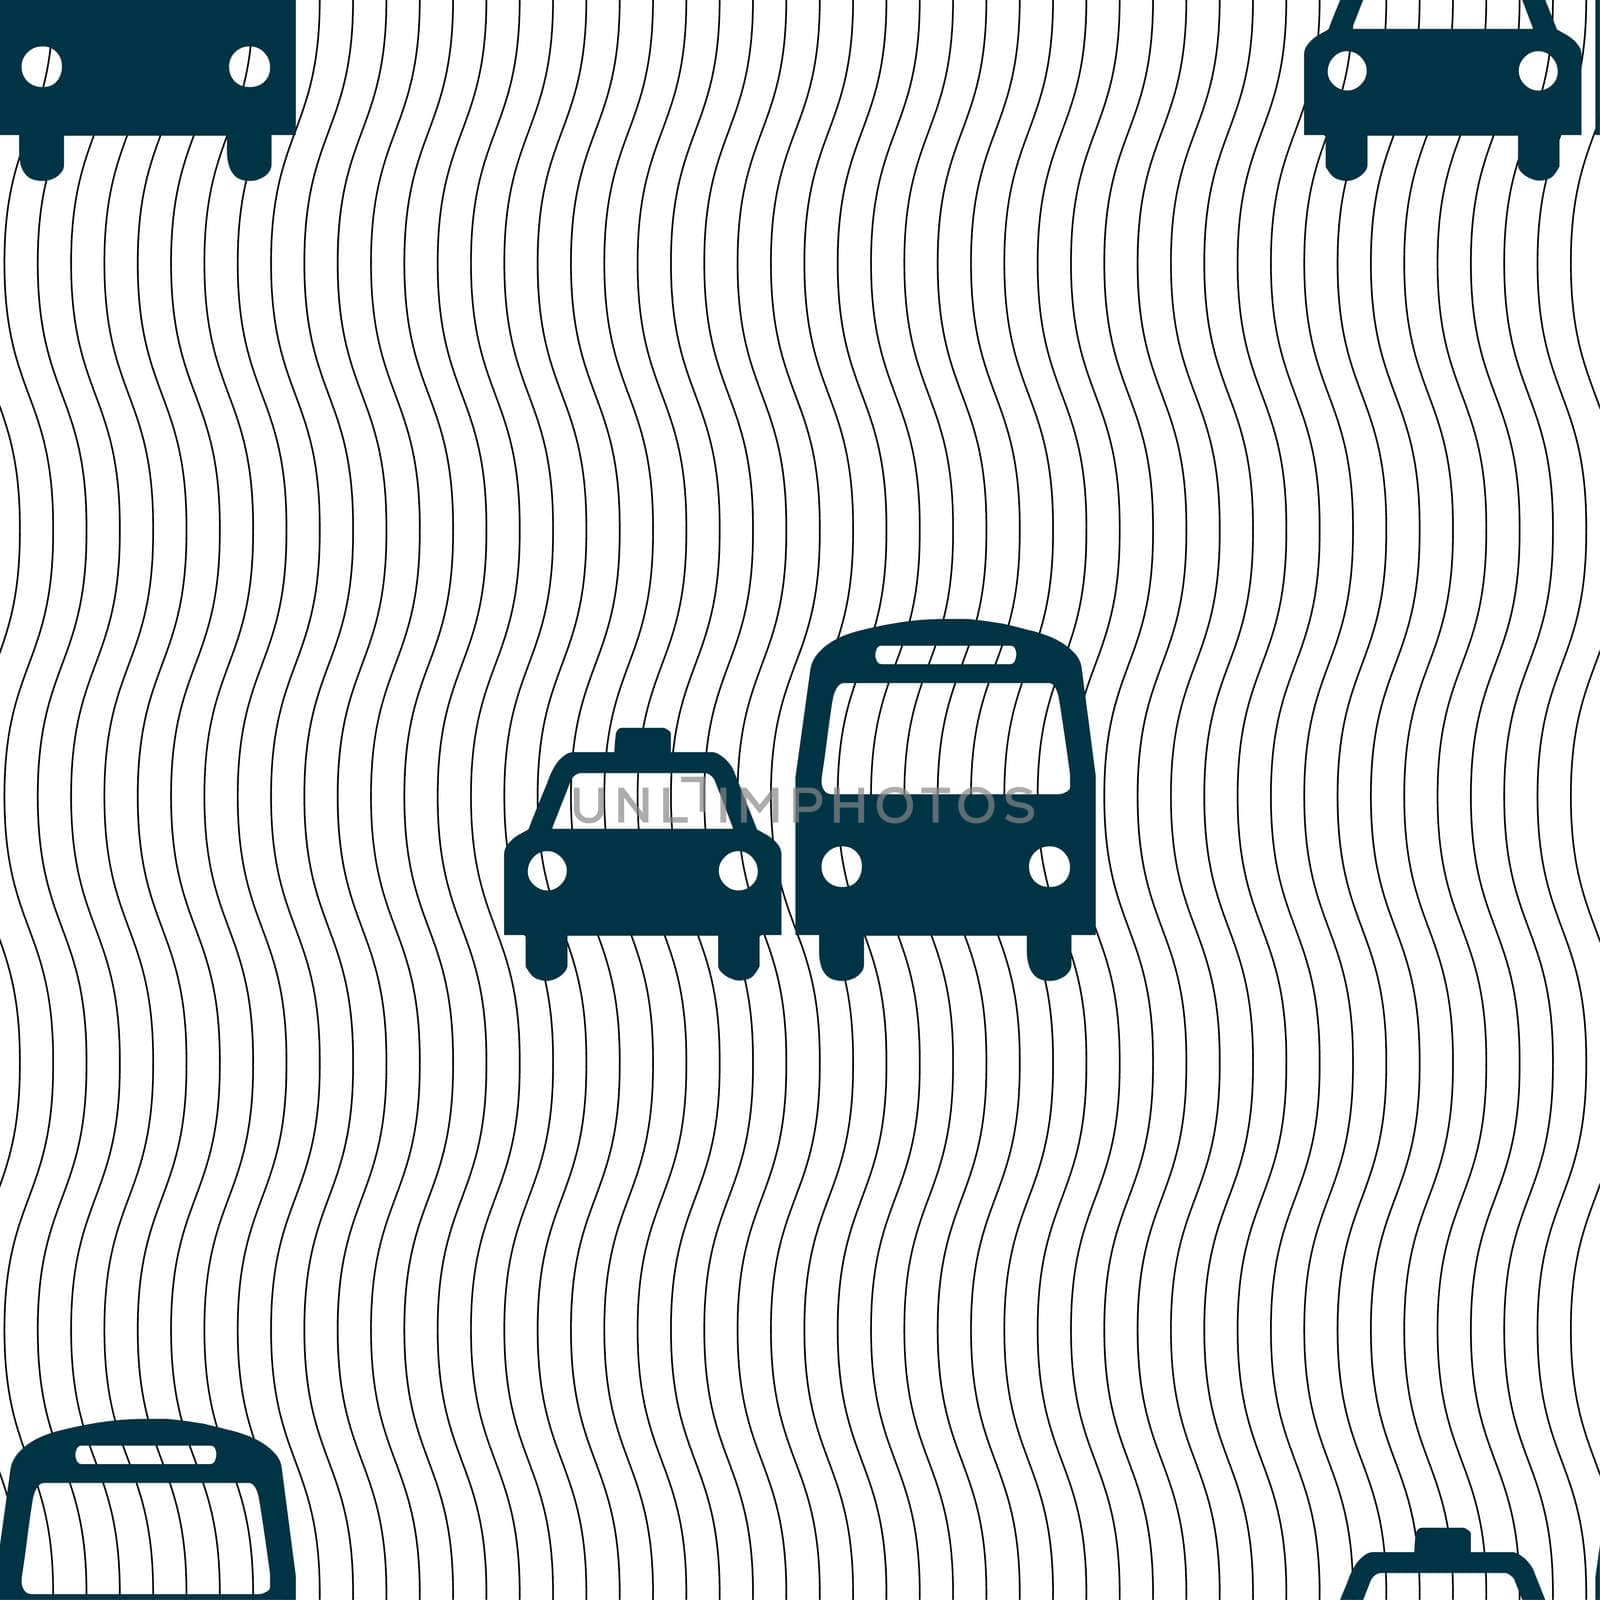 taxi icon sign. Seamless pattern with geometric texture. illustration